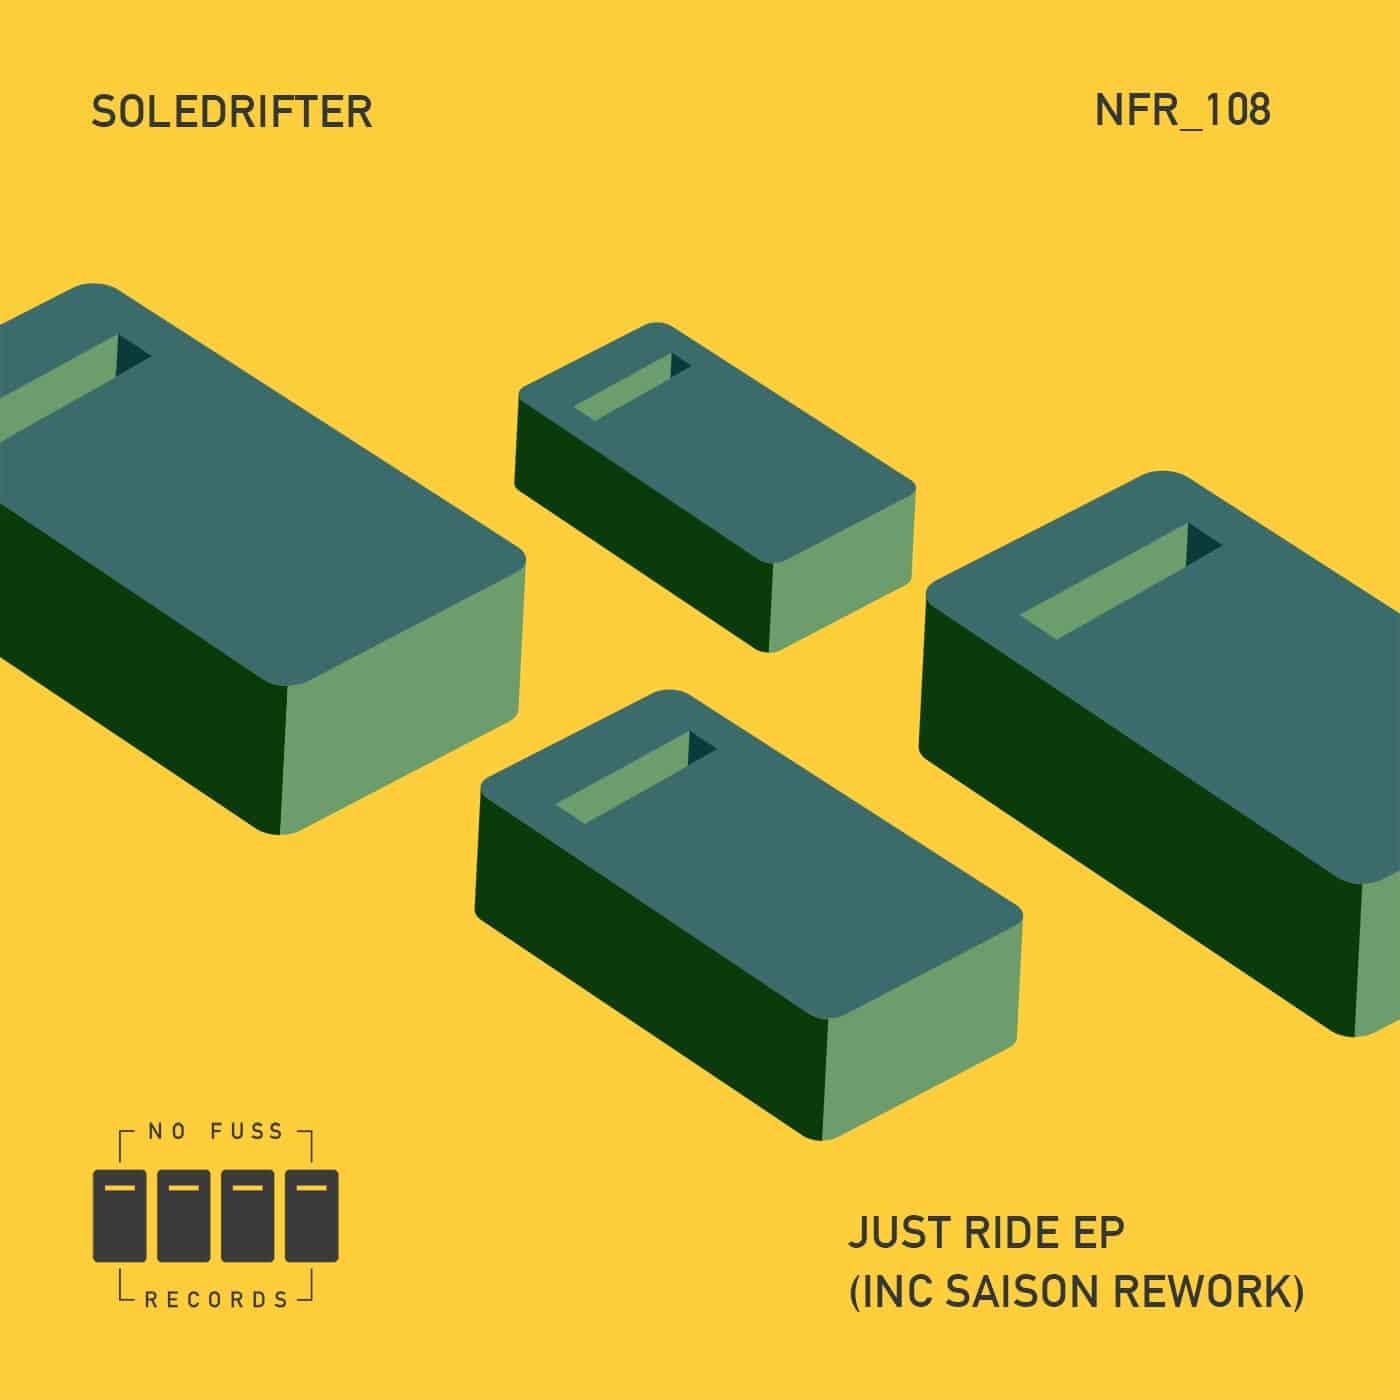 image cover: Soledrifter - Just Ride EP / NFR108